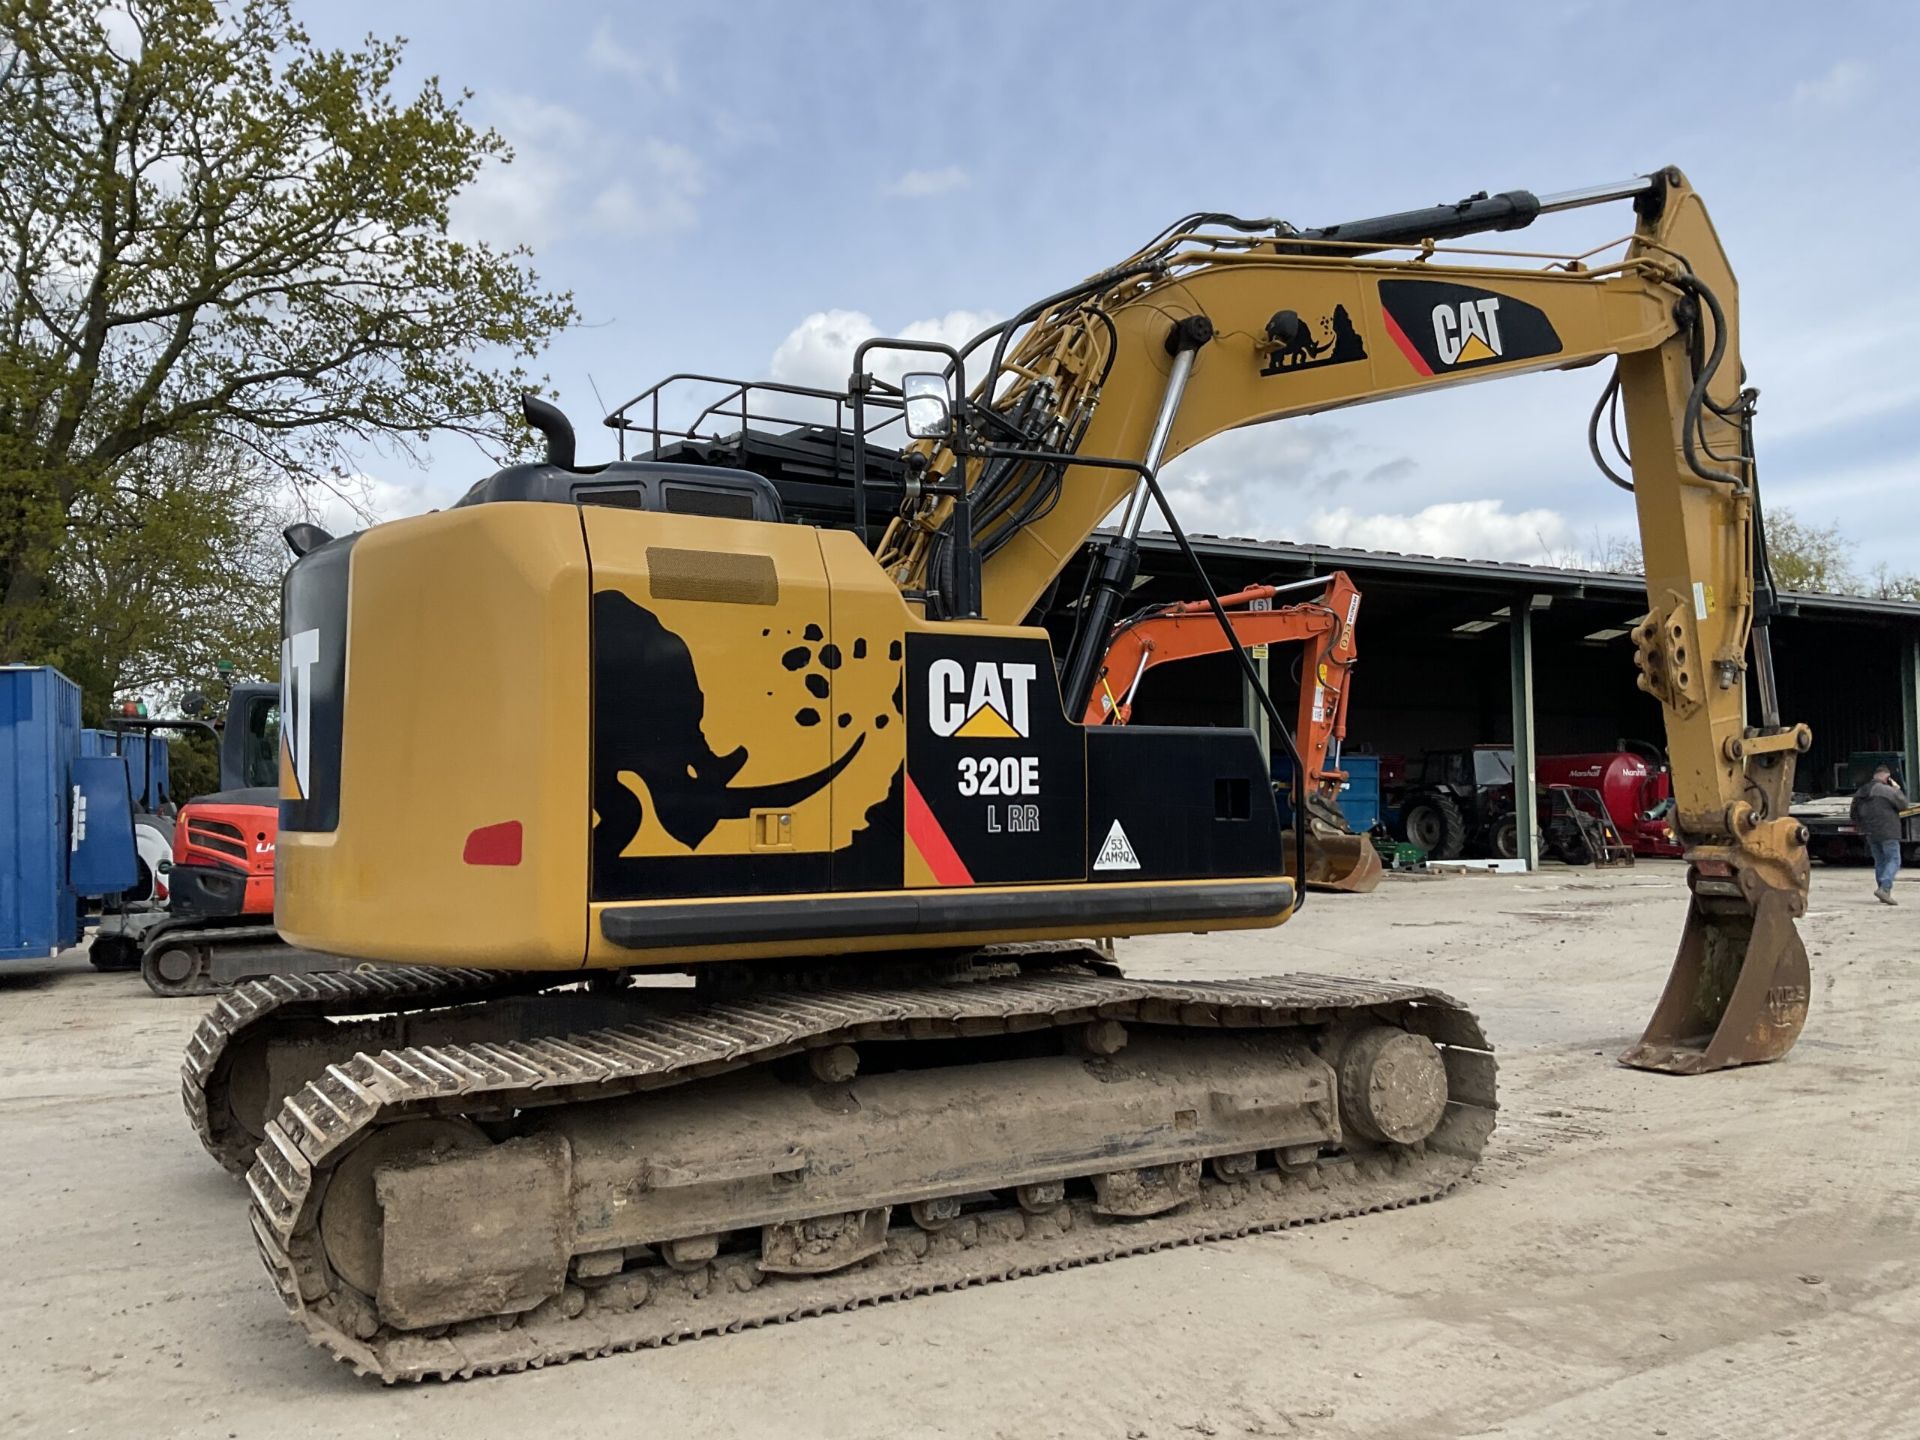 CAT 320 EL RR EXCAVATOR READY TO BOOST YOUR PROJECTS - Image 6 of 11